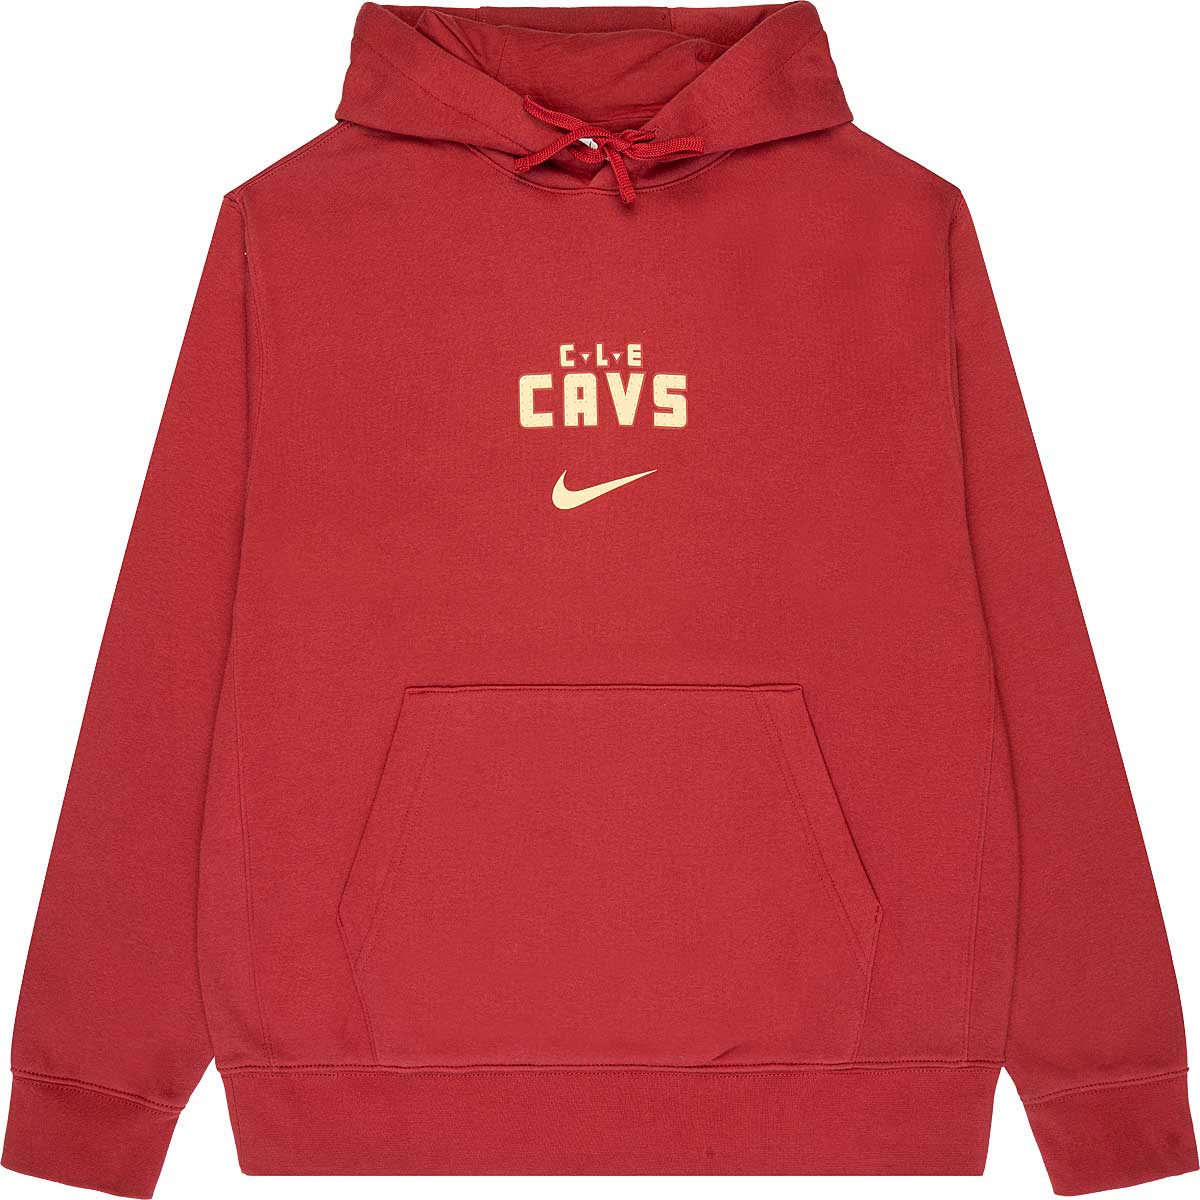 Image of Nike NBA Cleveland Cavaliers City Edition Club Hoody, Red/gold